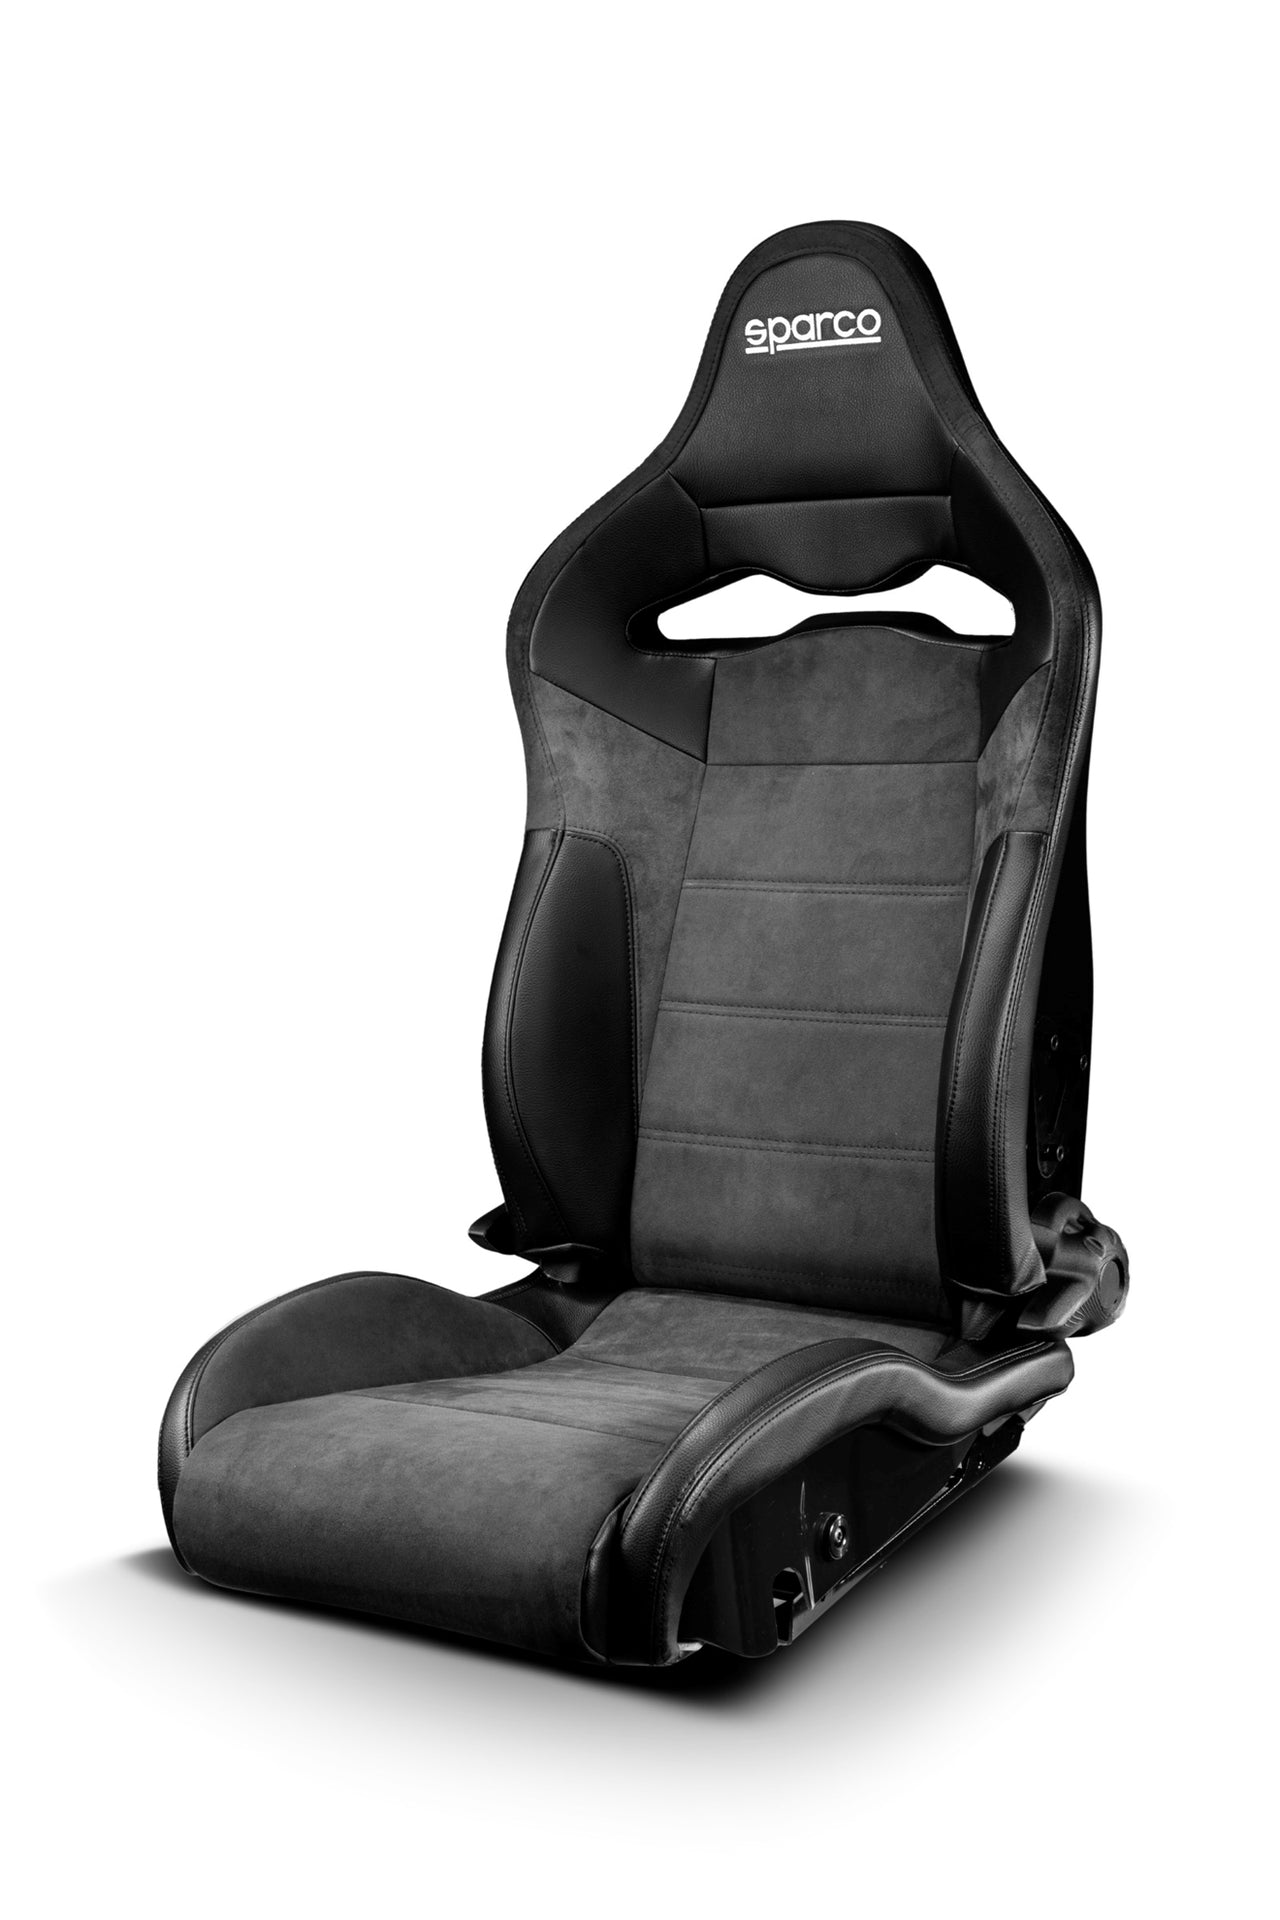 Sparco SPR Seat Front Image